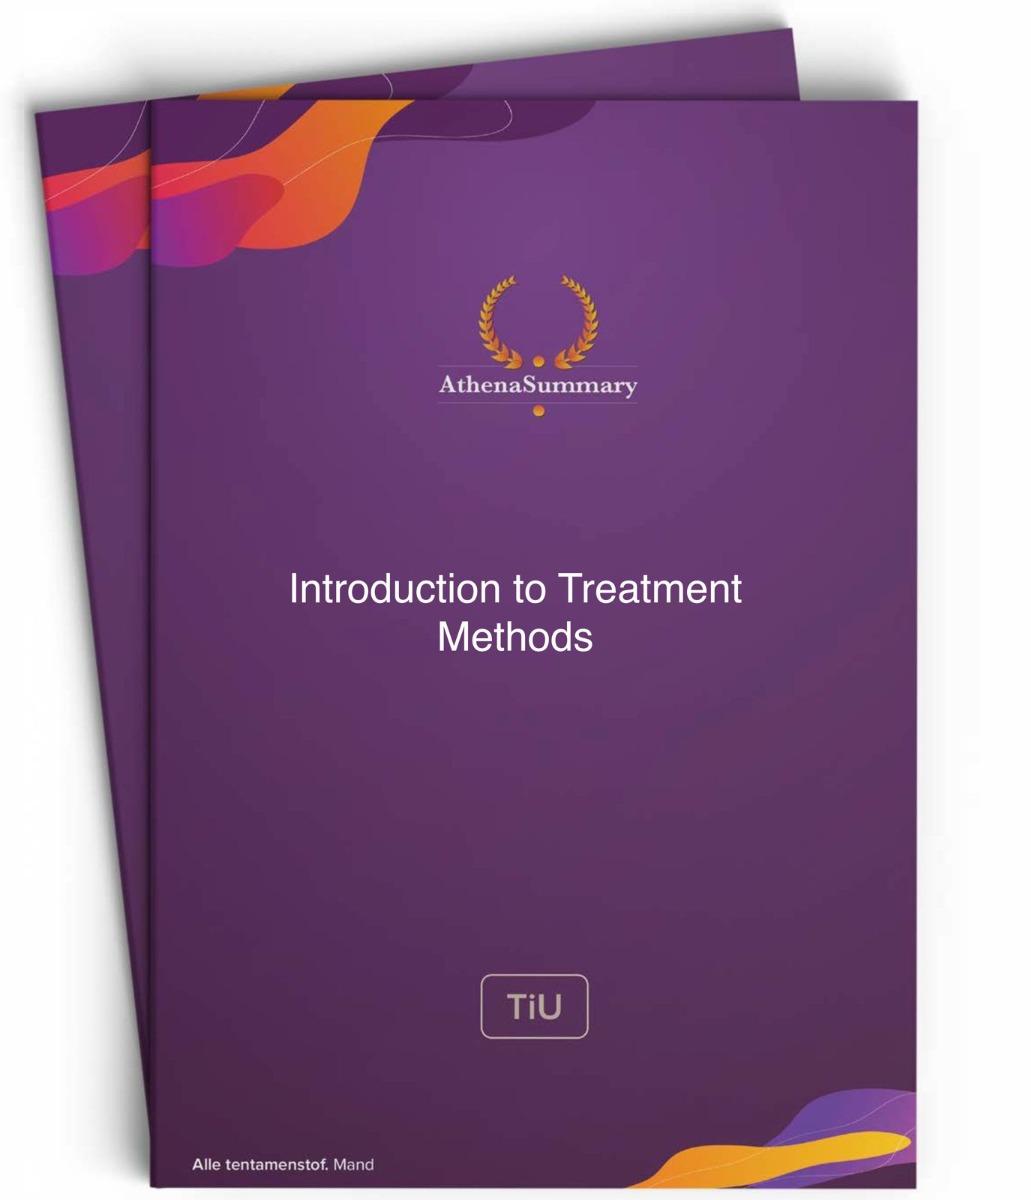 Literature & Lecture Summary: Introduction to Treatment Methods